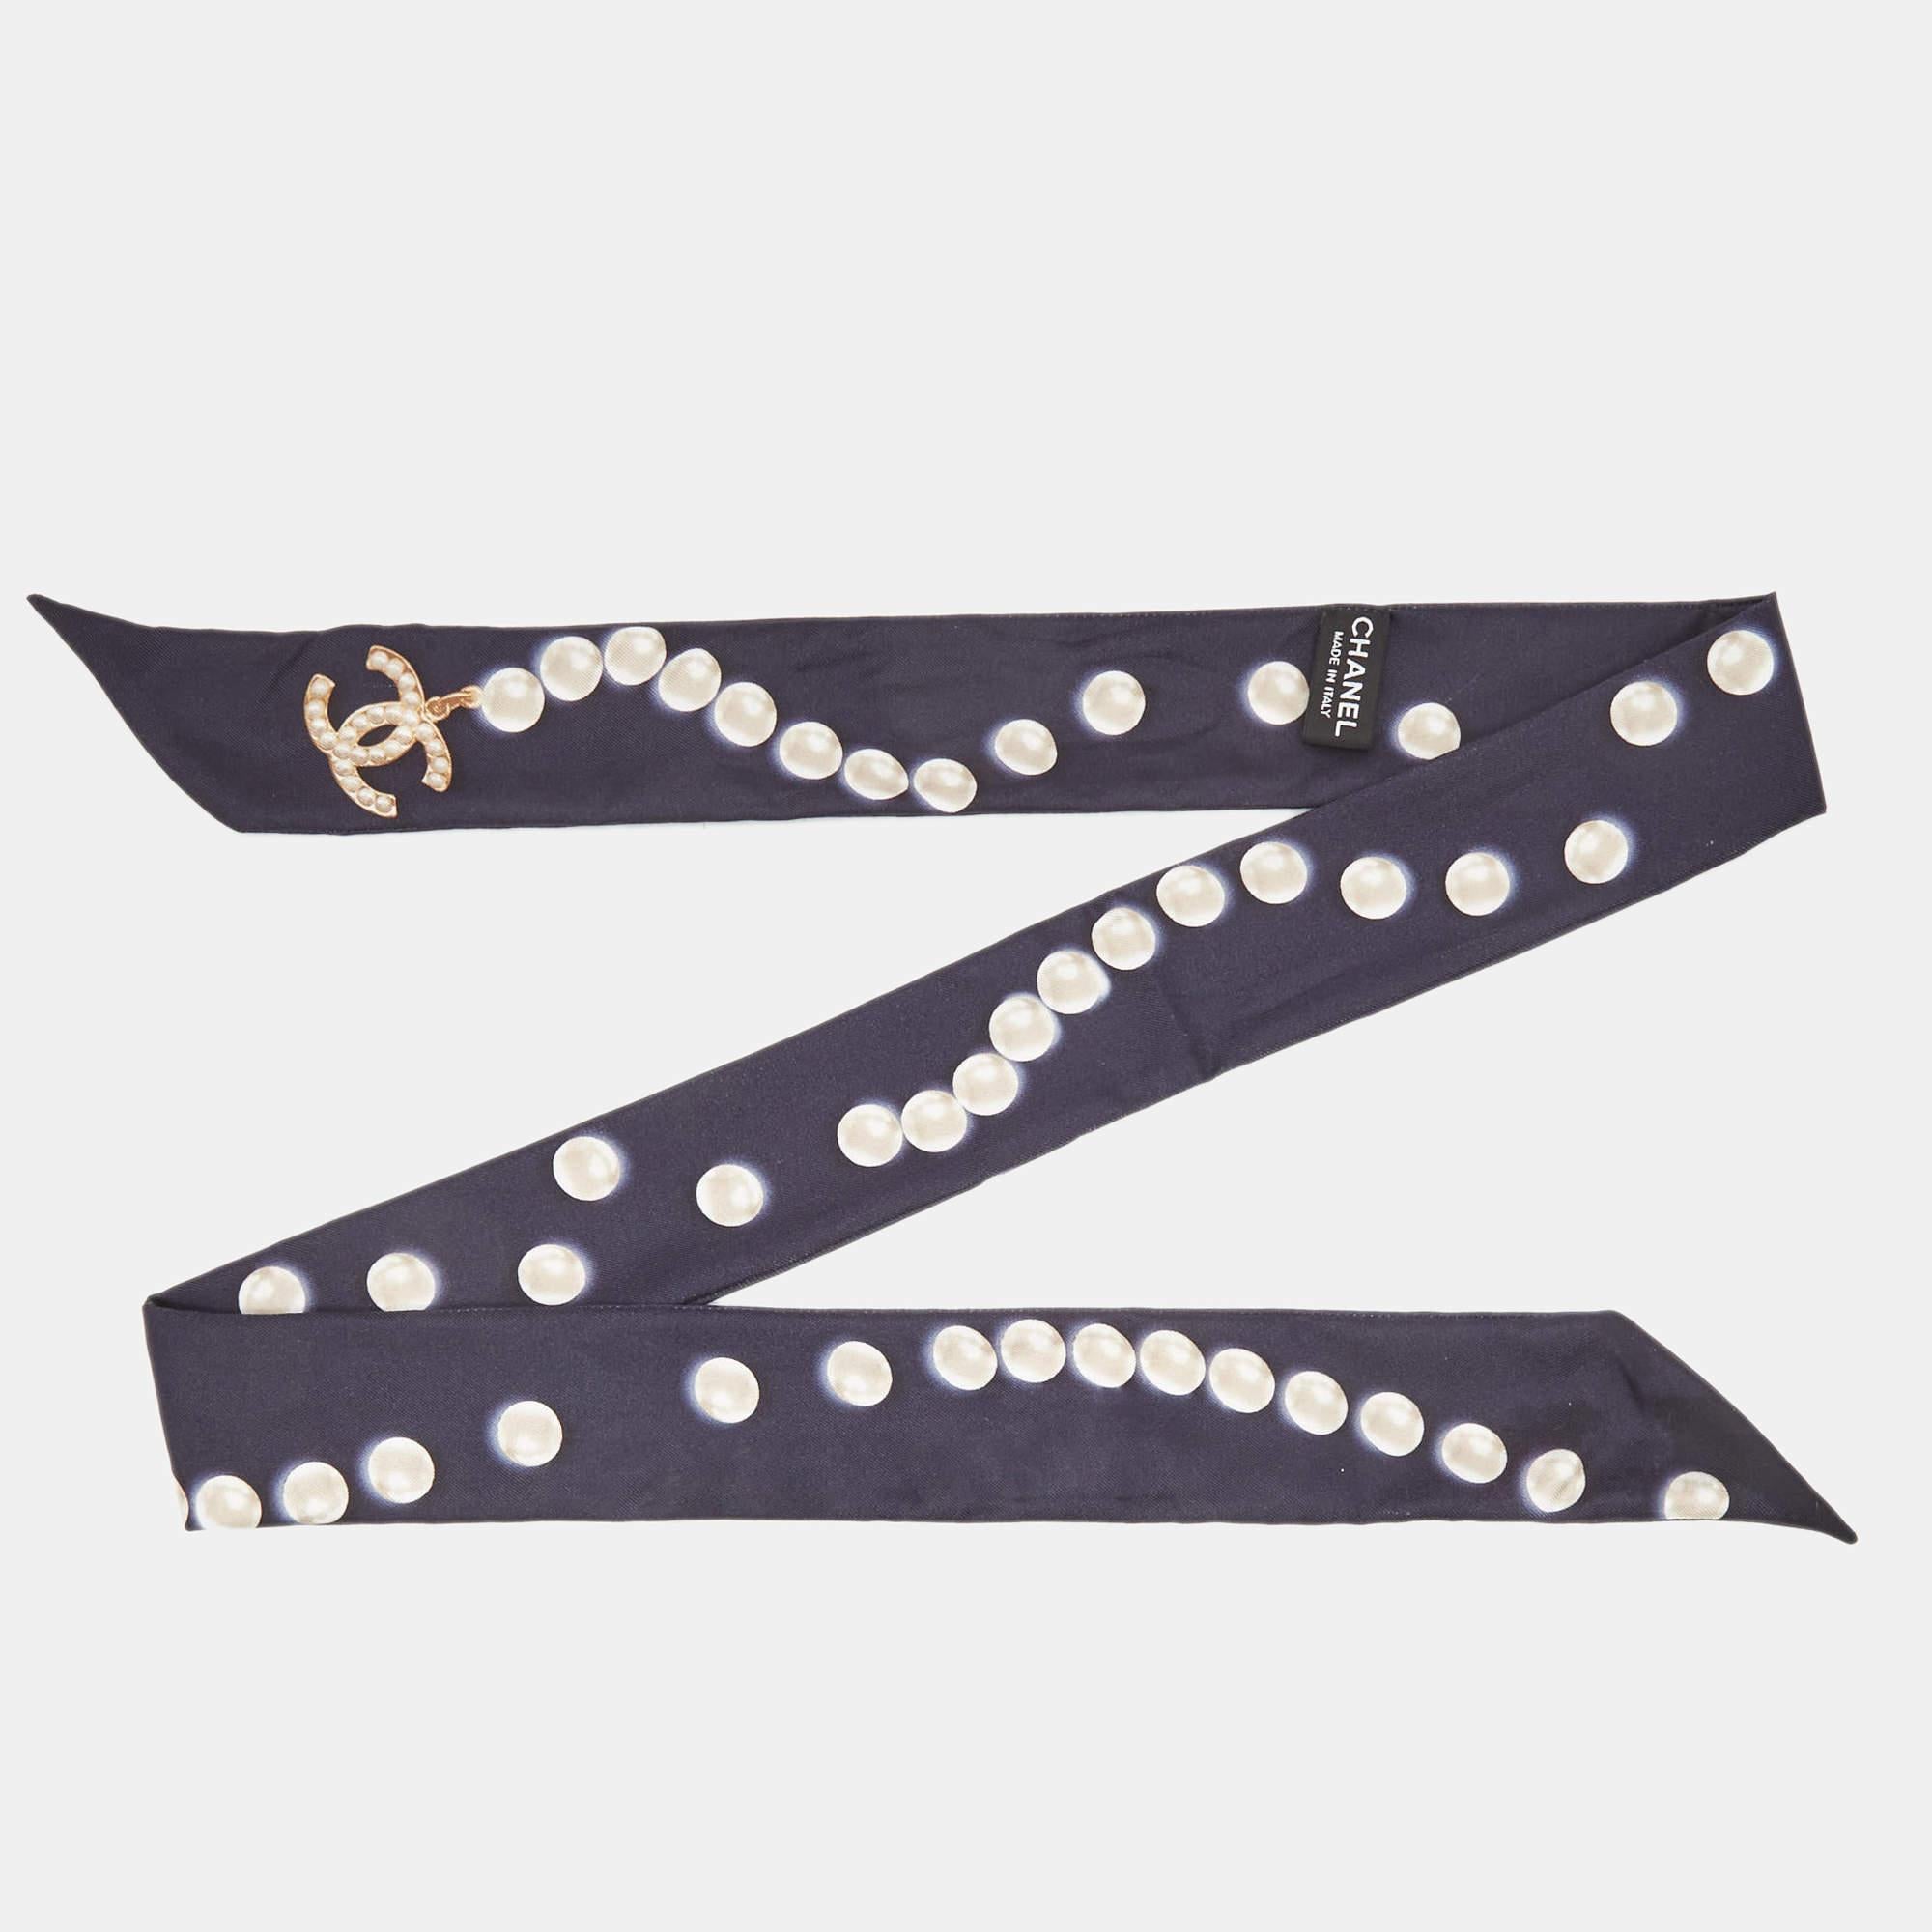 To be tied around your wrist, head, or handbags, bandeau scarves are versatile accessories to own. Chanel's bandeau scarves bring unique designs on fabrics that are smooth and luxurious to touch. This one here is cut from silk and detailed with